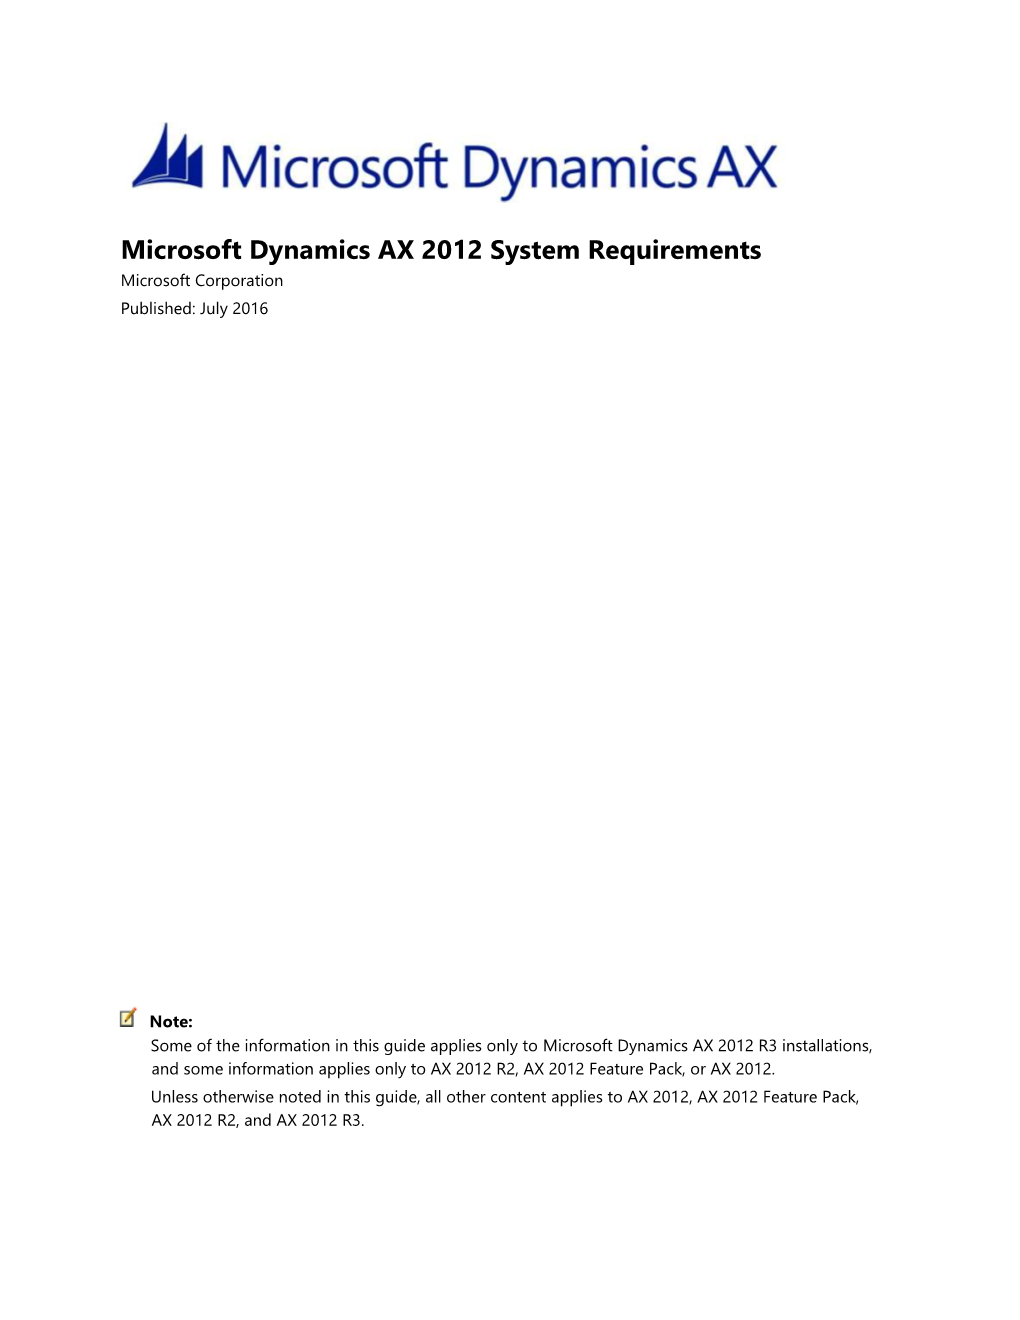 Microsoft Dynamics AX 2012 System Requirements Microsoft Corporation Published: July 2016